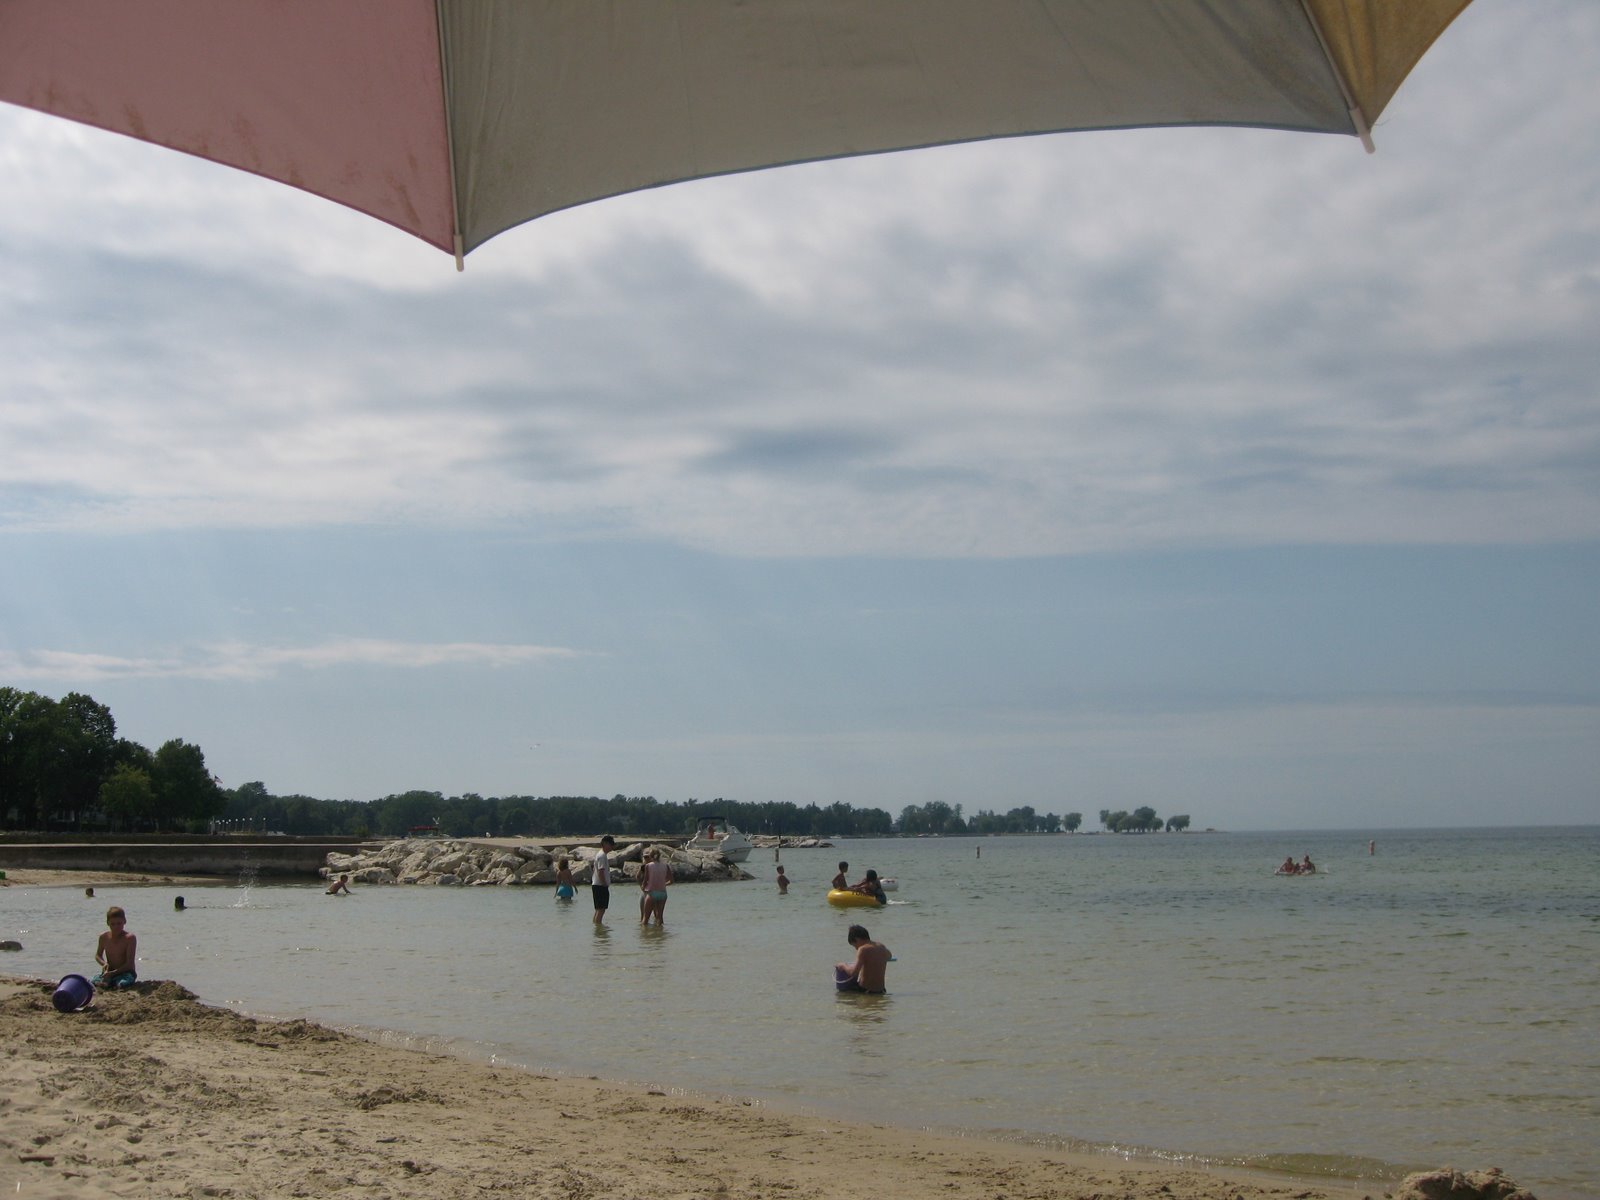 [Beaches+Egg+Harbor+Beach+with+Umbrella+and+Water+GREAT.jpg]